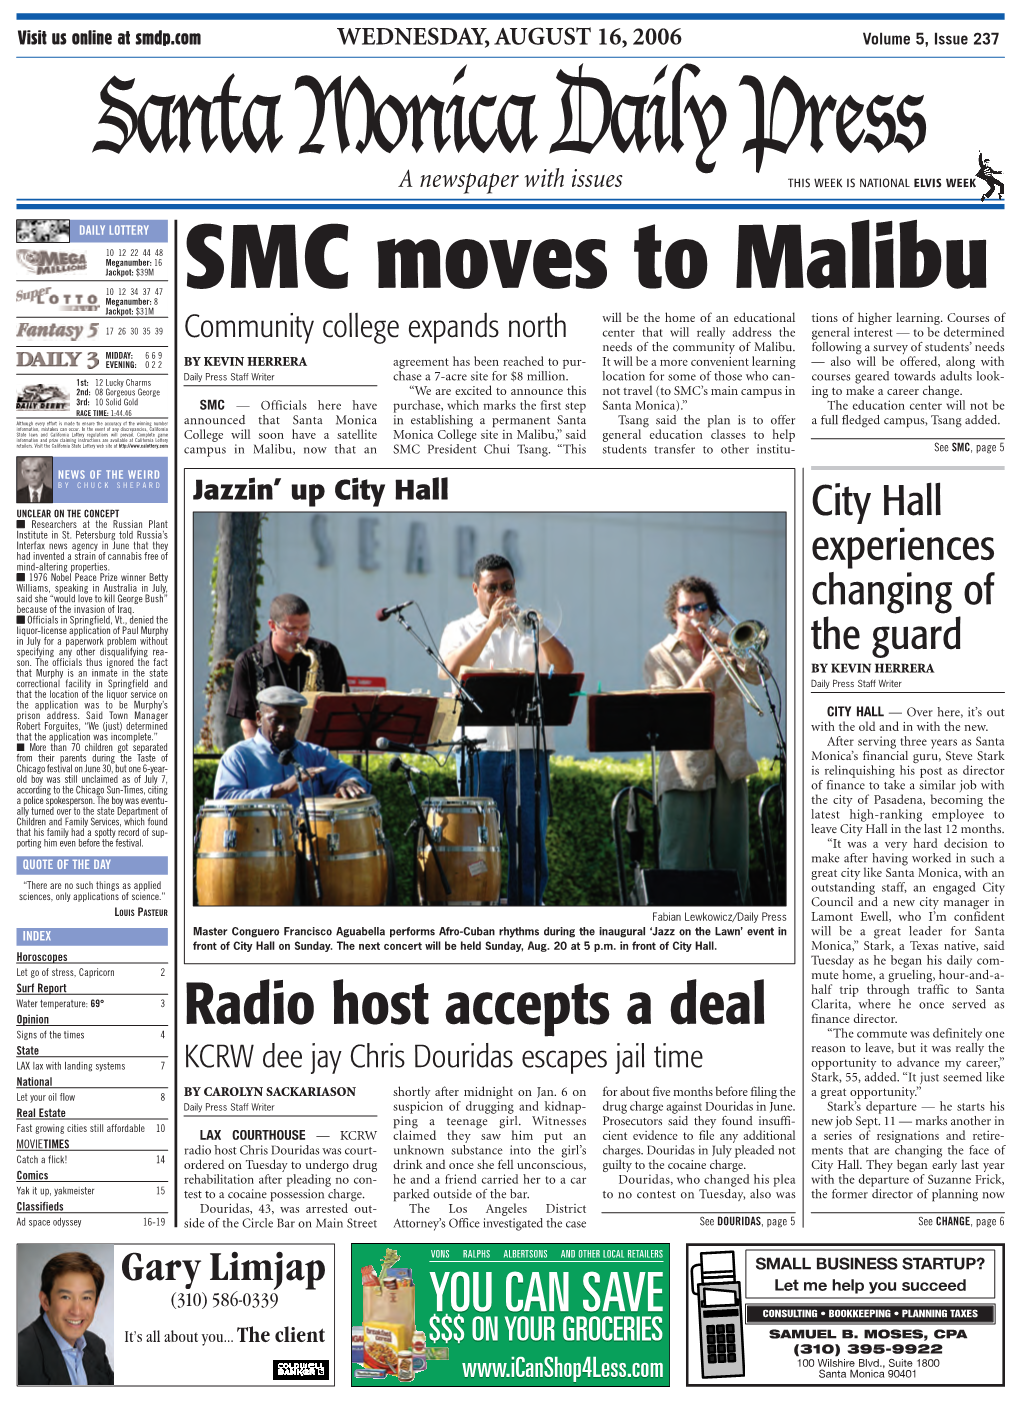 SMC Moves to Malibu Jackpot: $31M Will Be the Home of an Educational Tions of Higher Learning